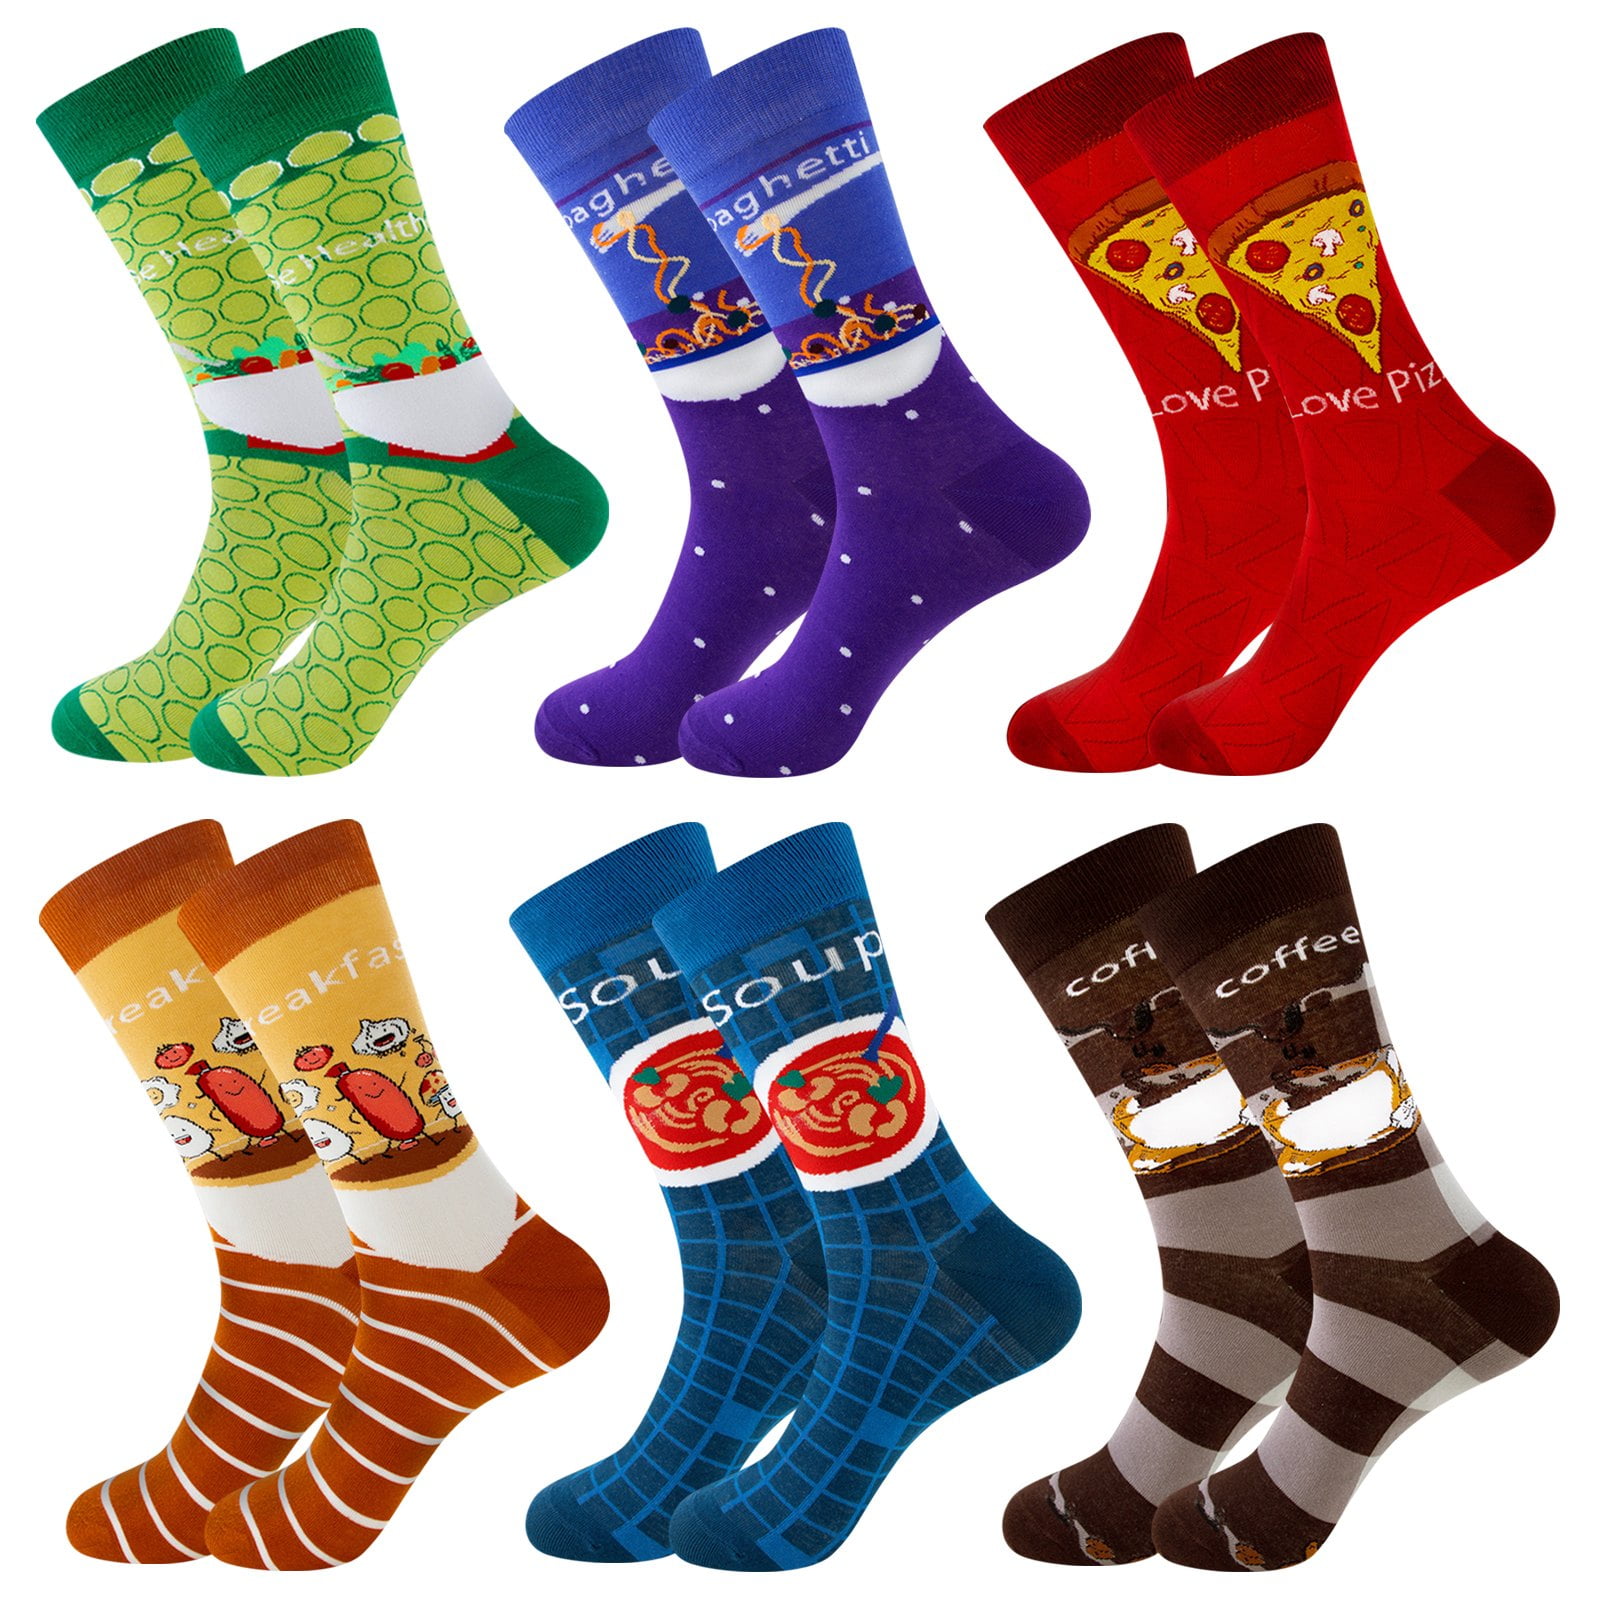 6 Pairs Colorful Novelty Crew Socks Soft Cotton Funny Patterned Casual ...